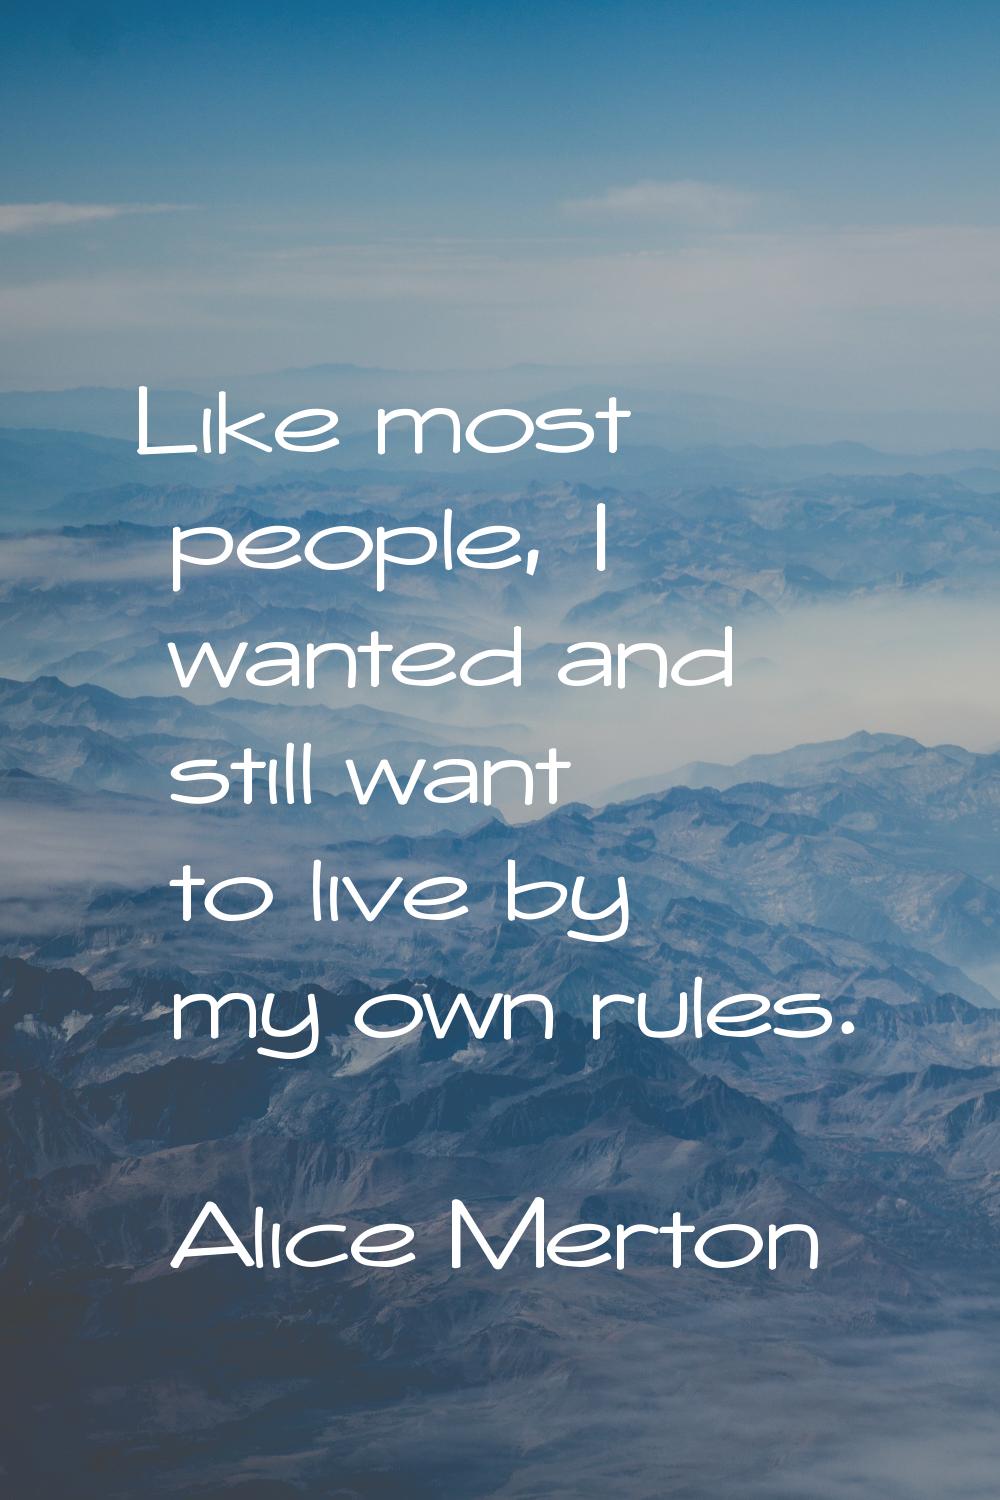 Like most people, I wanted and still want to live by my own rules.